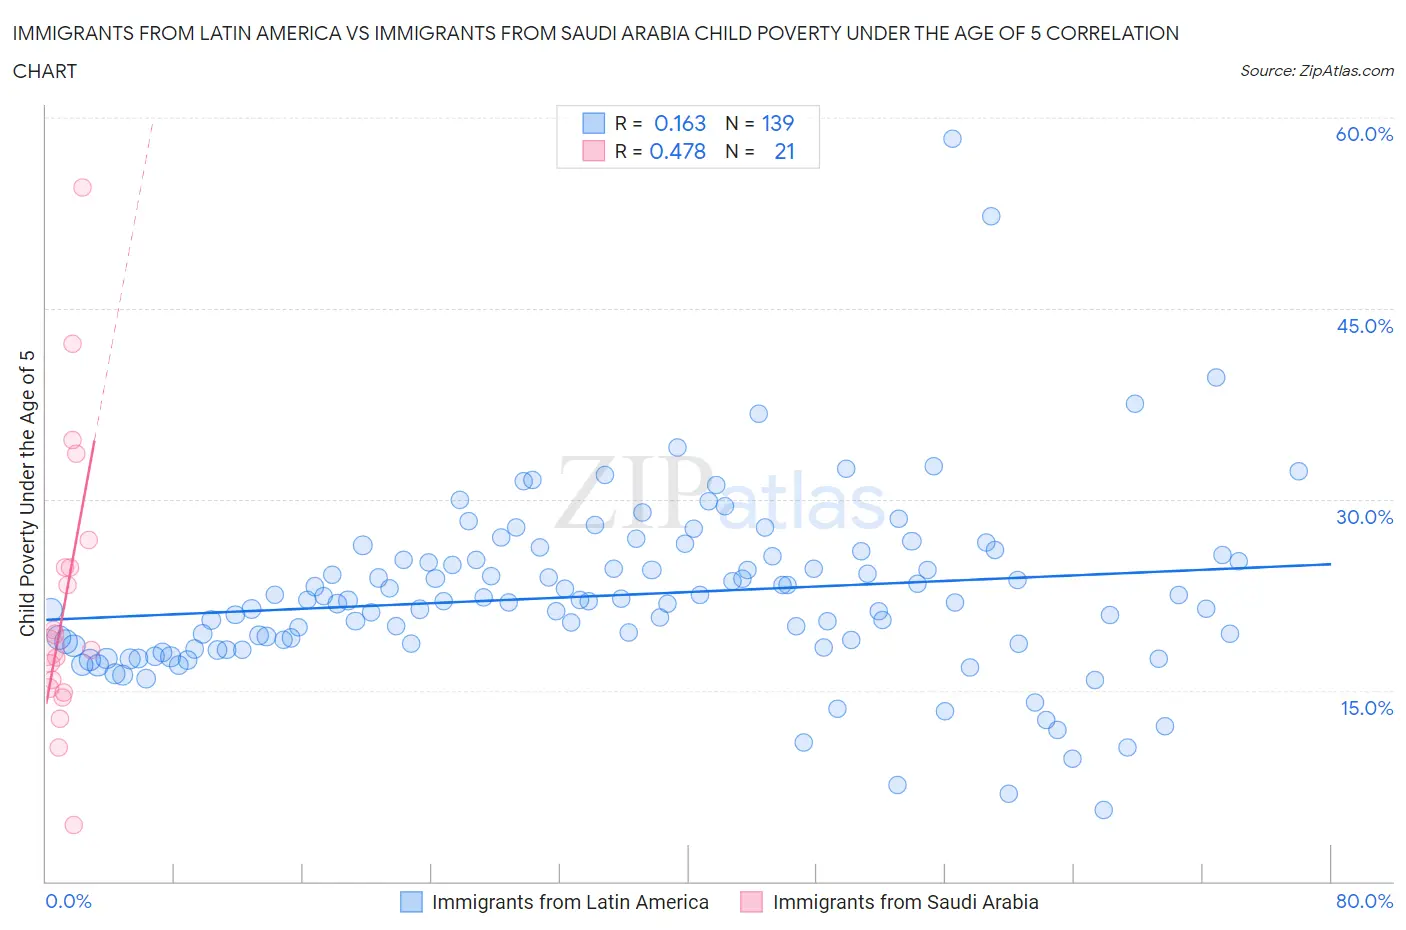 Immigrants from Latin America vs Immigrants from Saudi Arabia Child Poverty Under the Age of 5